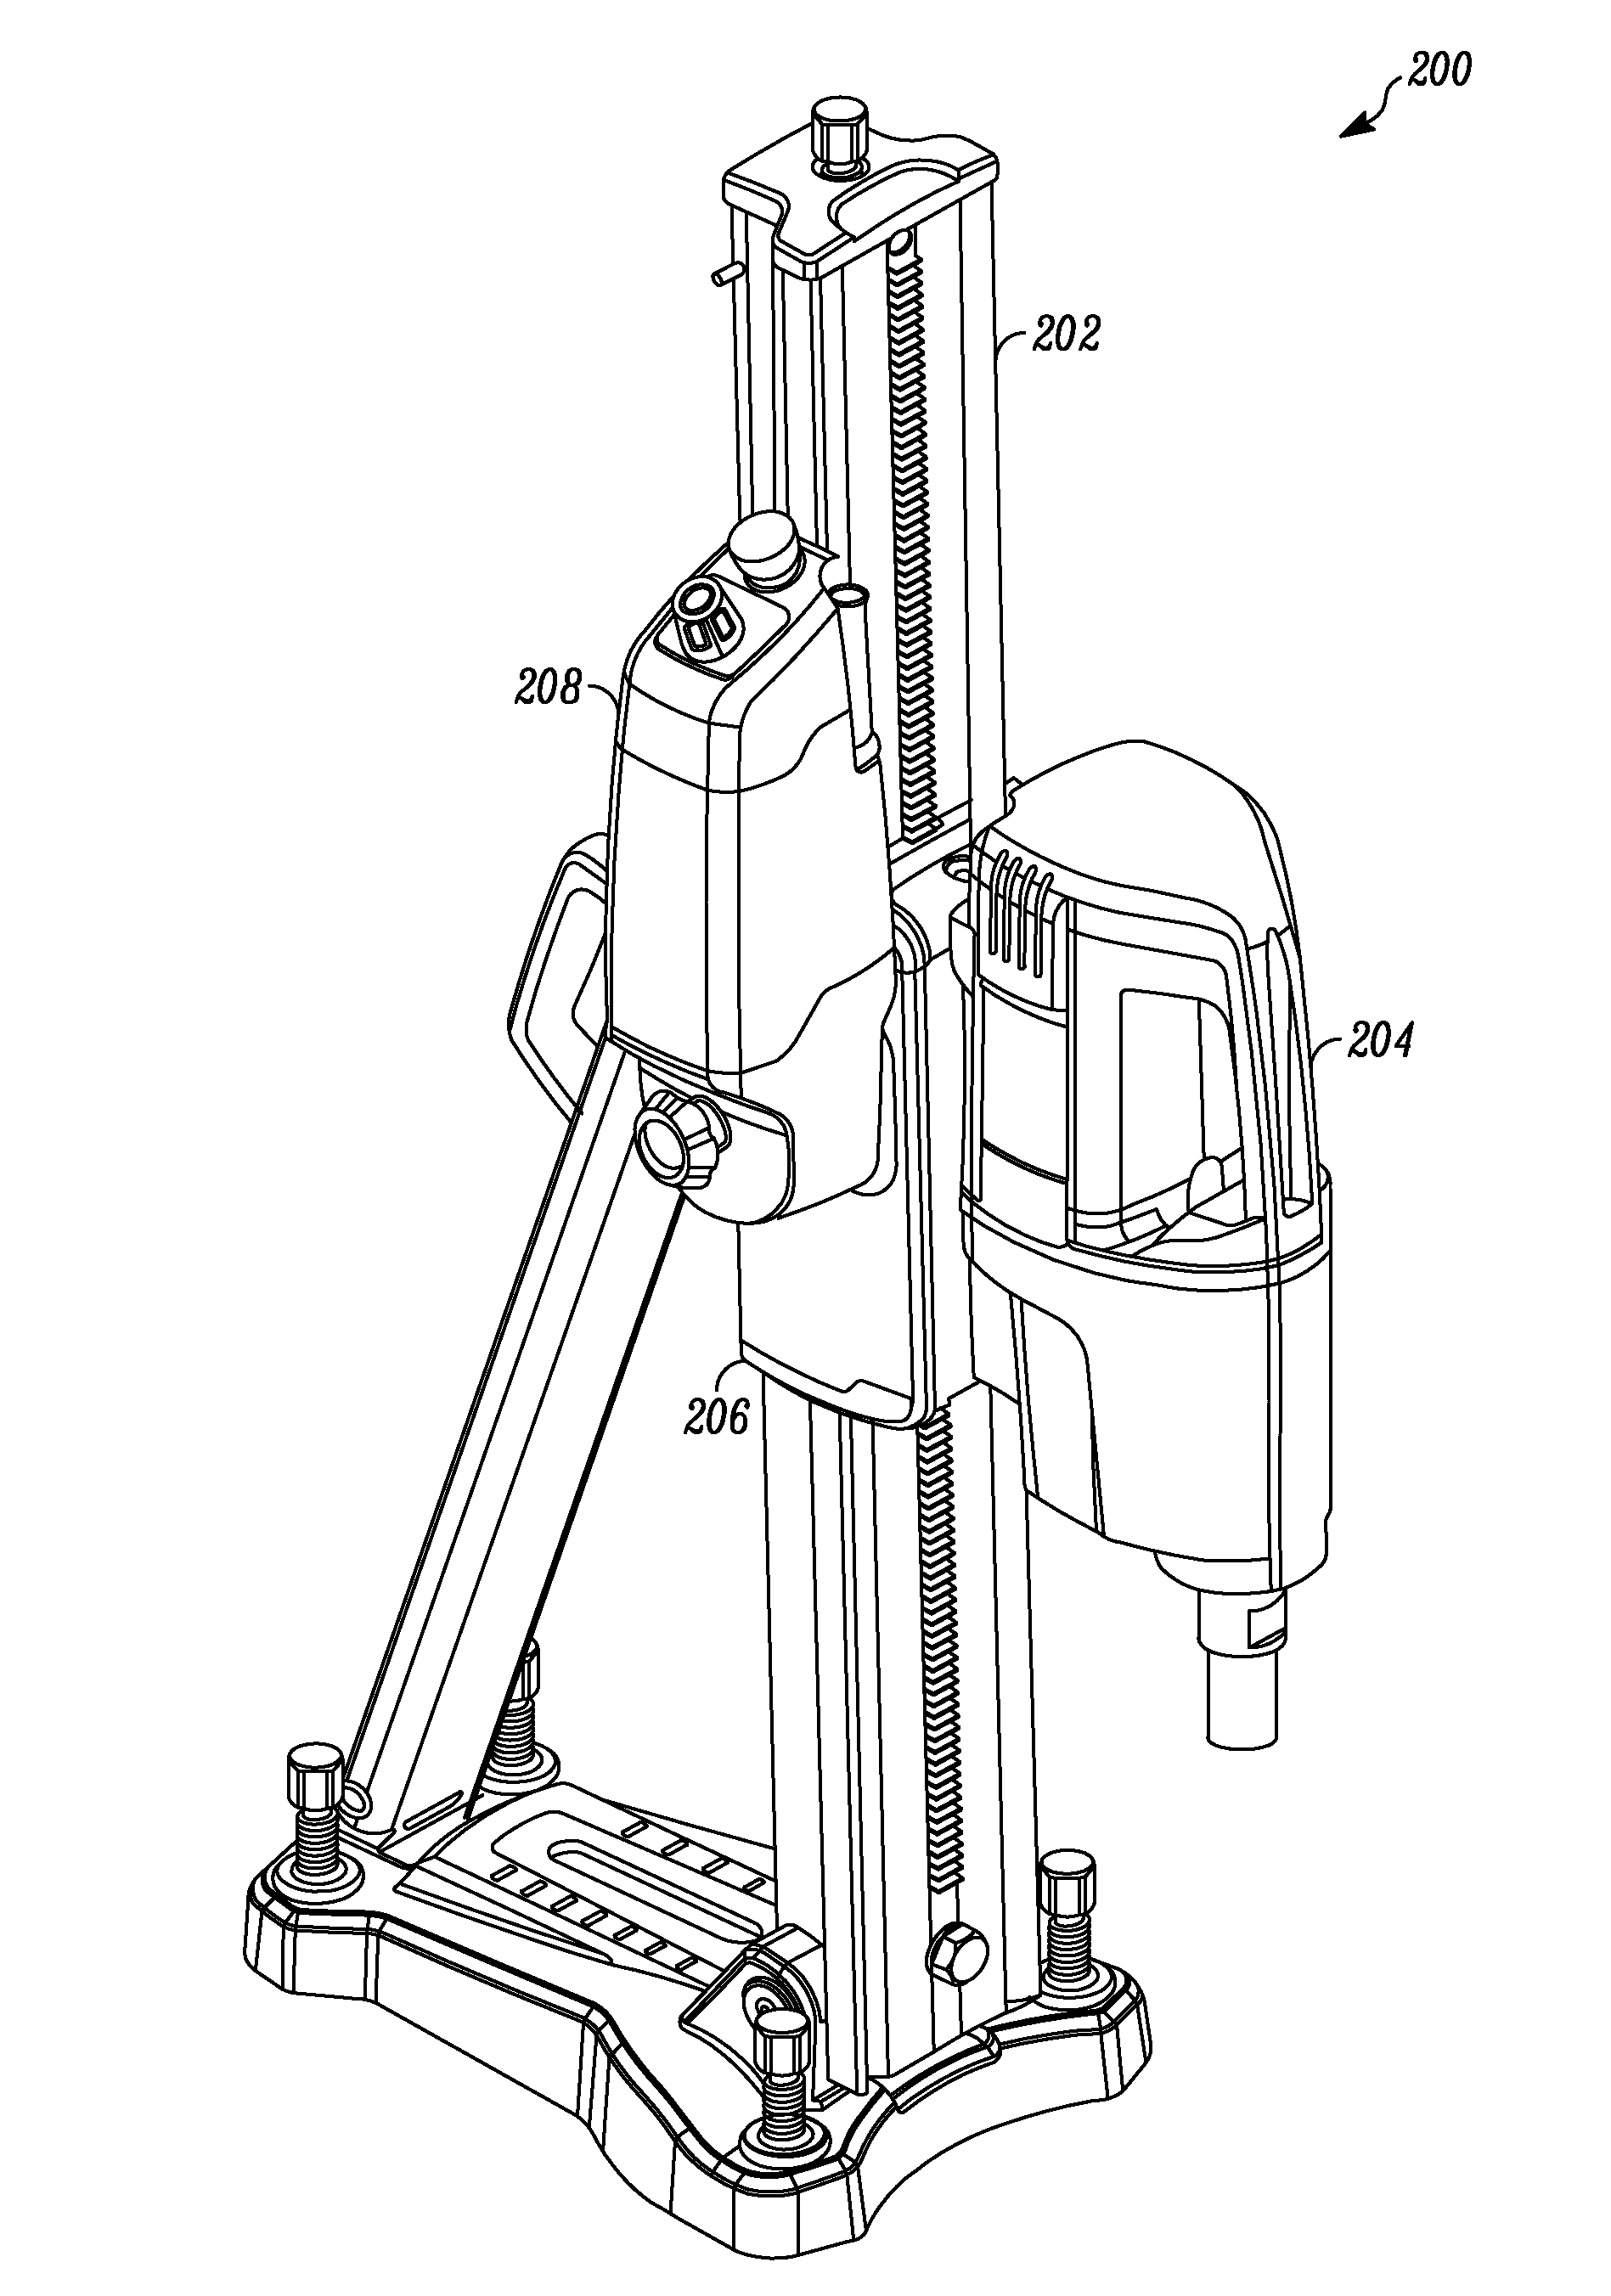 Drilling device with a controller for the feeding unit